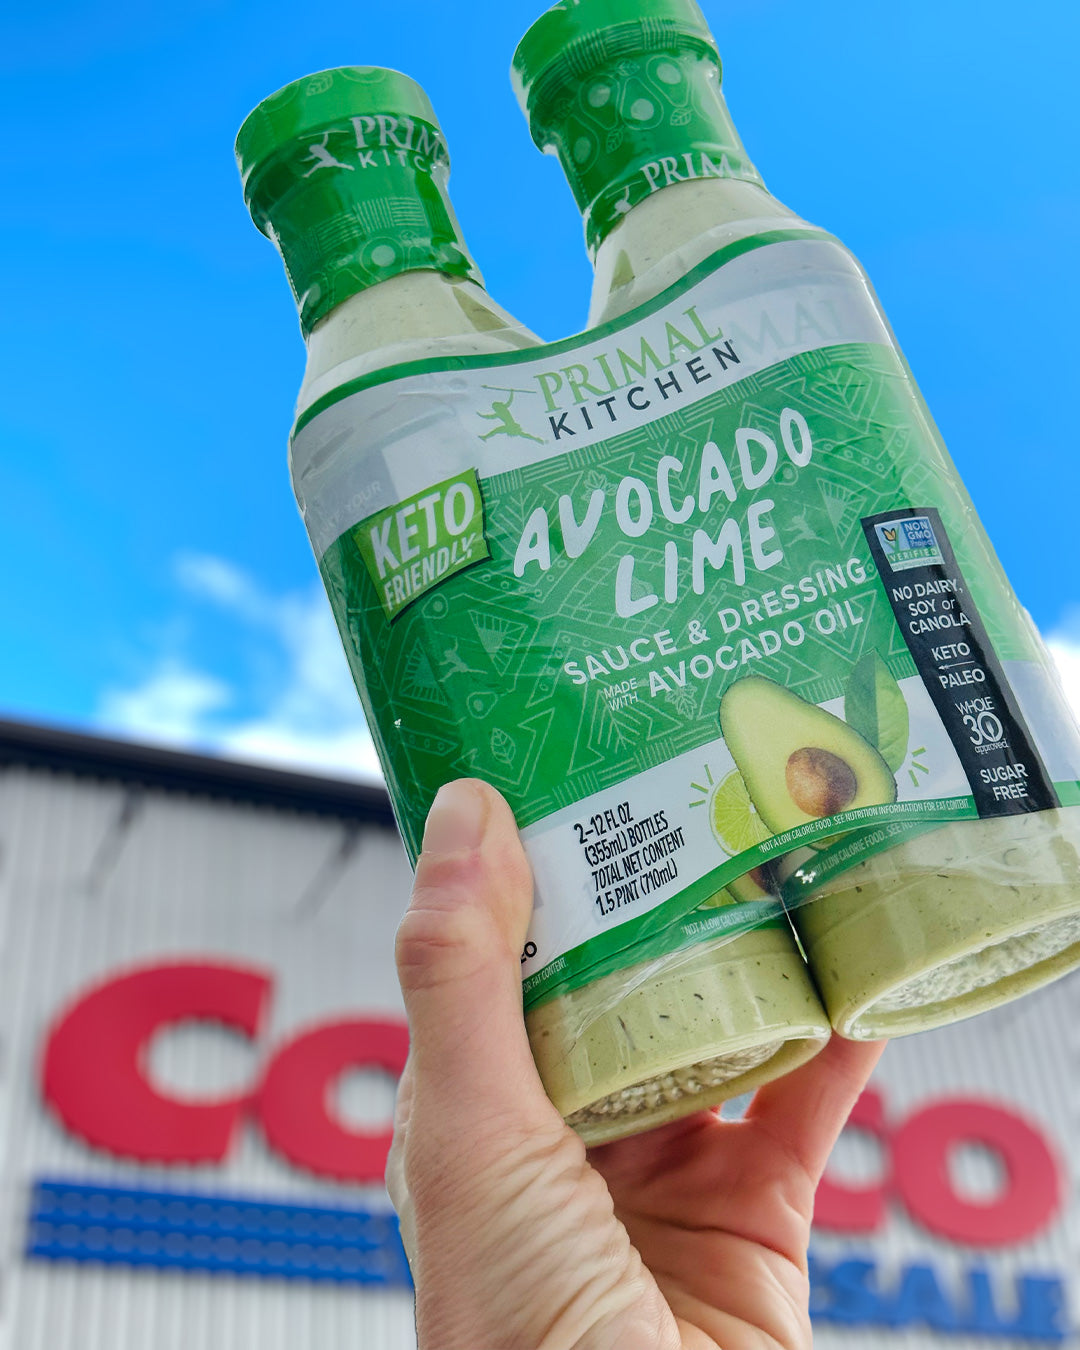 Avocado Lime Costco Sweepstakes Official Terms & Conditions